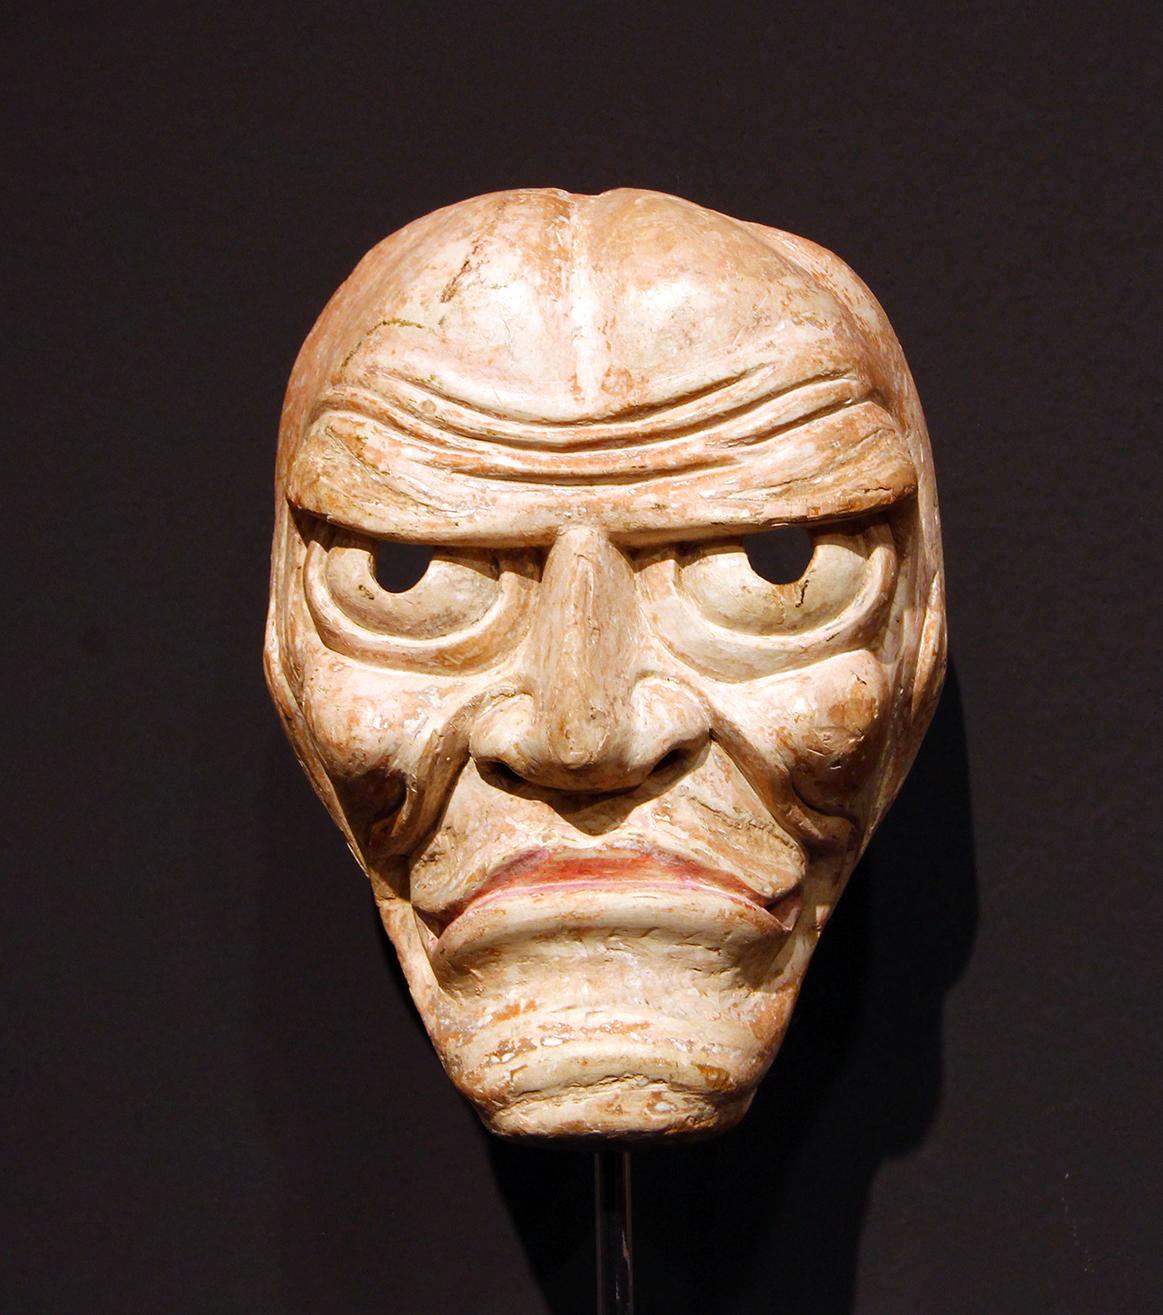 A rare Japanese Bukaku comic demon mask dating from the early Edo period, but could also be from the late Momoyama period.
The early Edo period is the golden age of Noh tragic theater.
It is masterfully sculpted by accentuating the depth of the